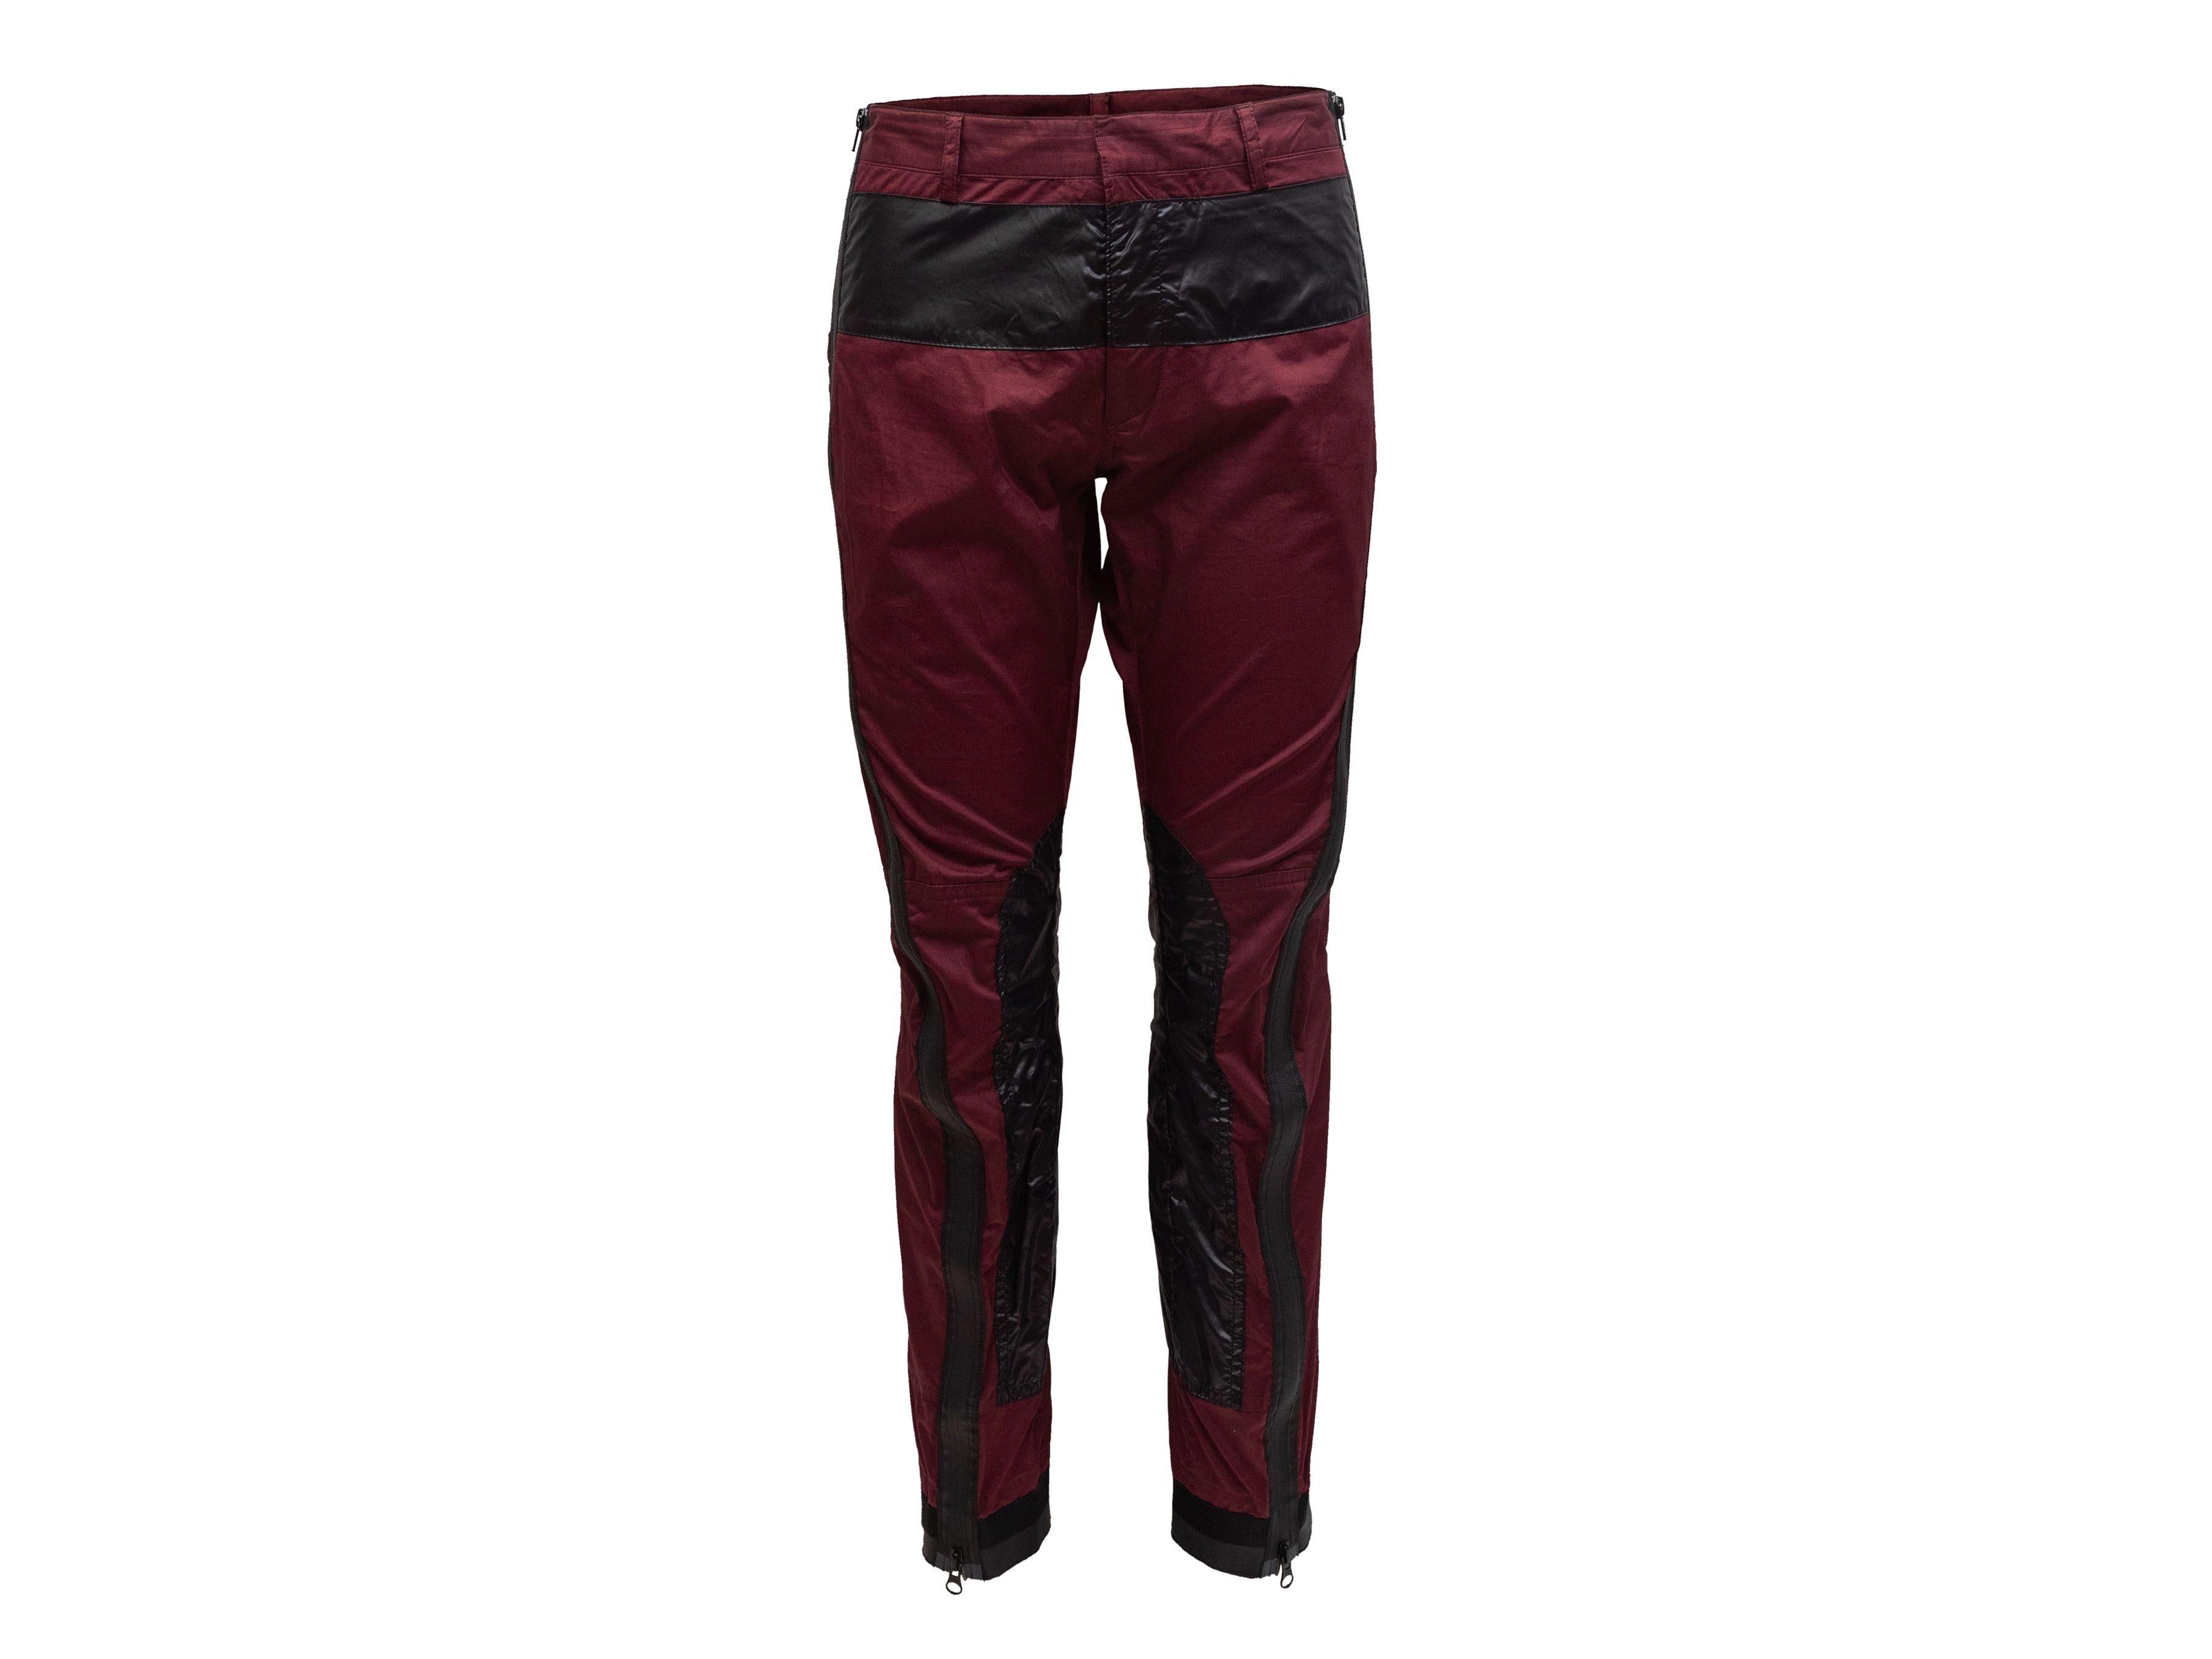 Product Details: Maroon and black color block skinny-leg pants by Dries Van Noten. Dual back pockets. Zip accents at sides. Zip closure at front. Designer size 48. 32